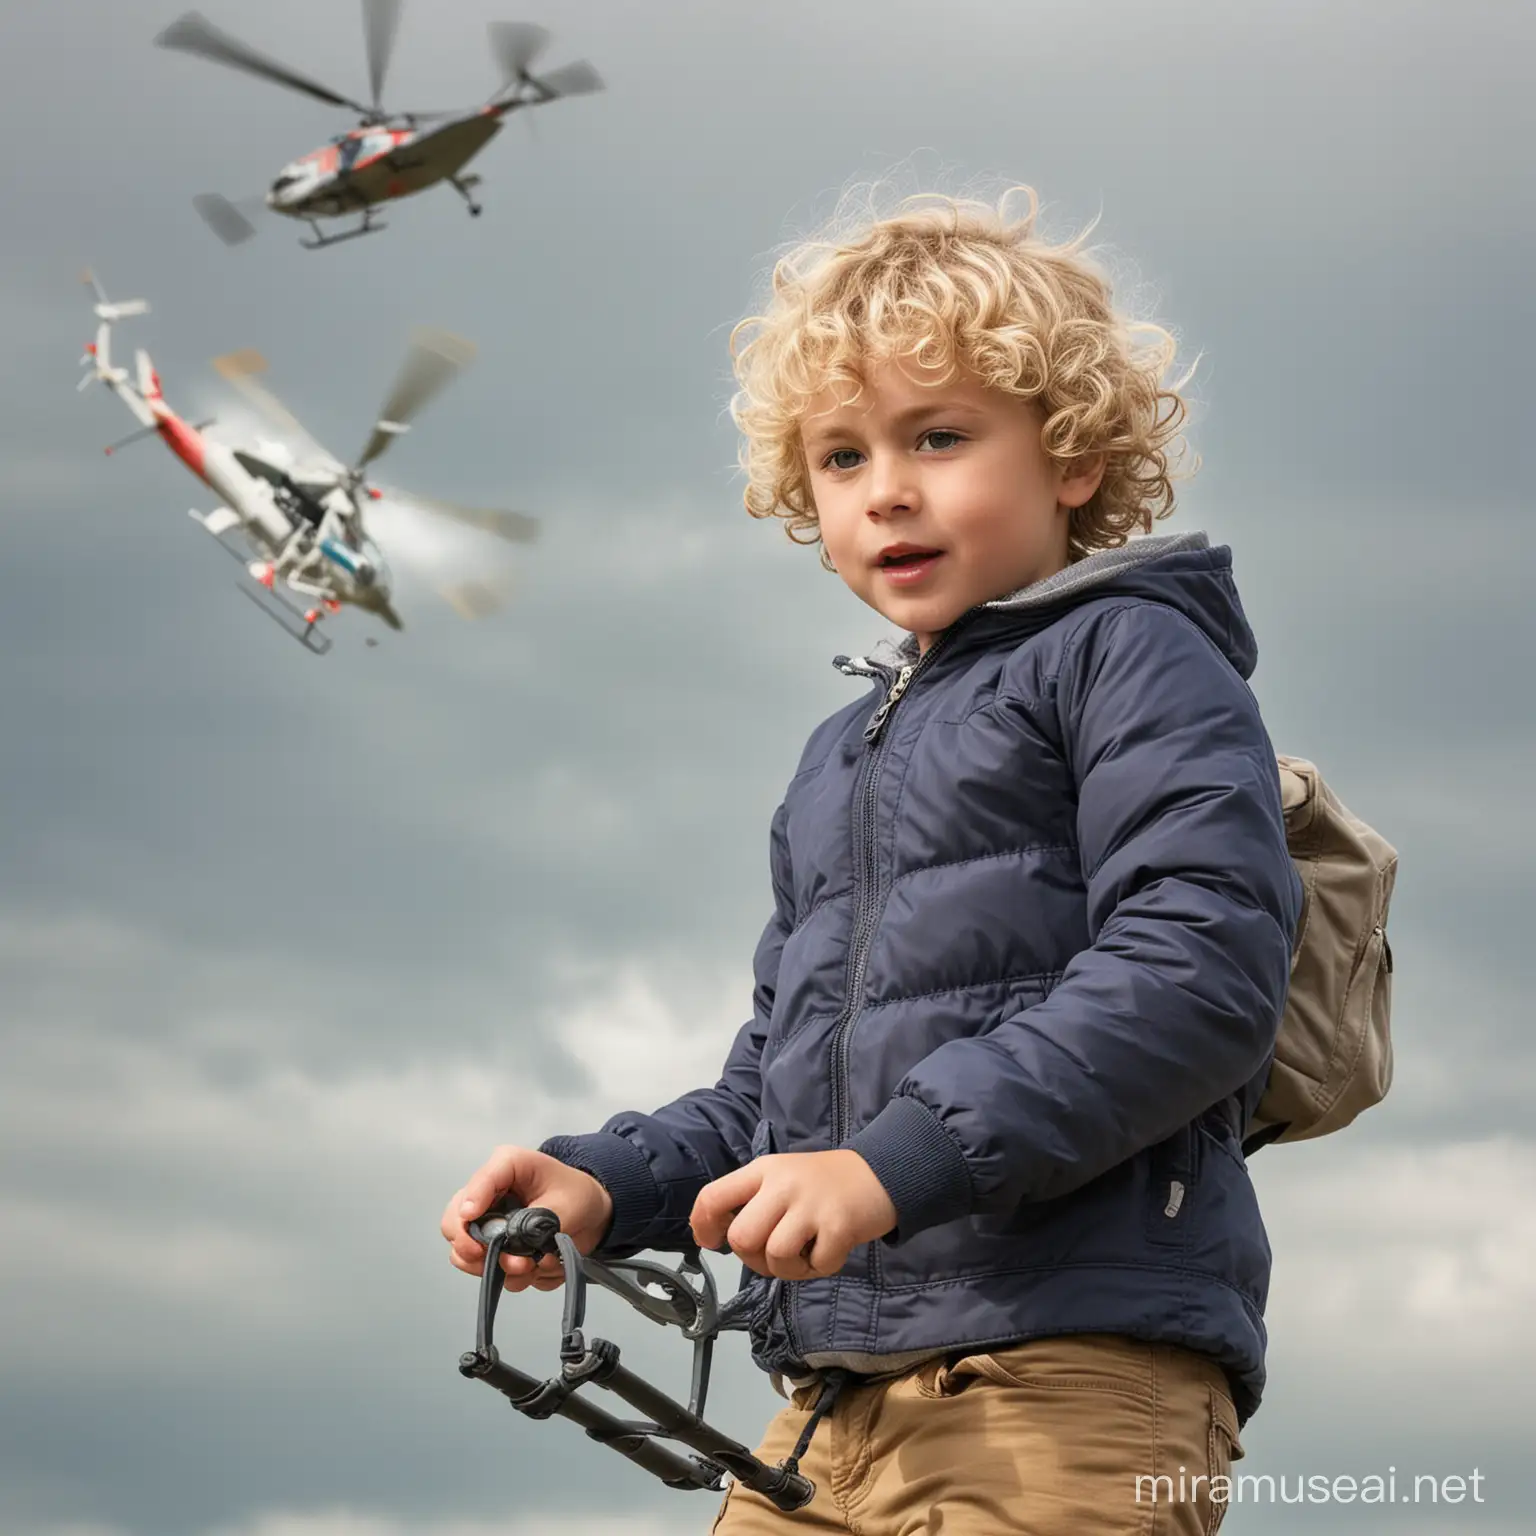 CurlyHaired Boy Piloting a Helicopter